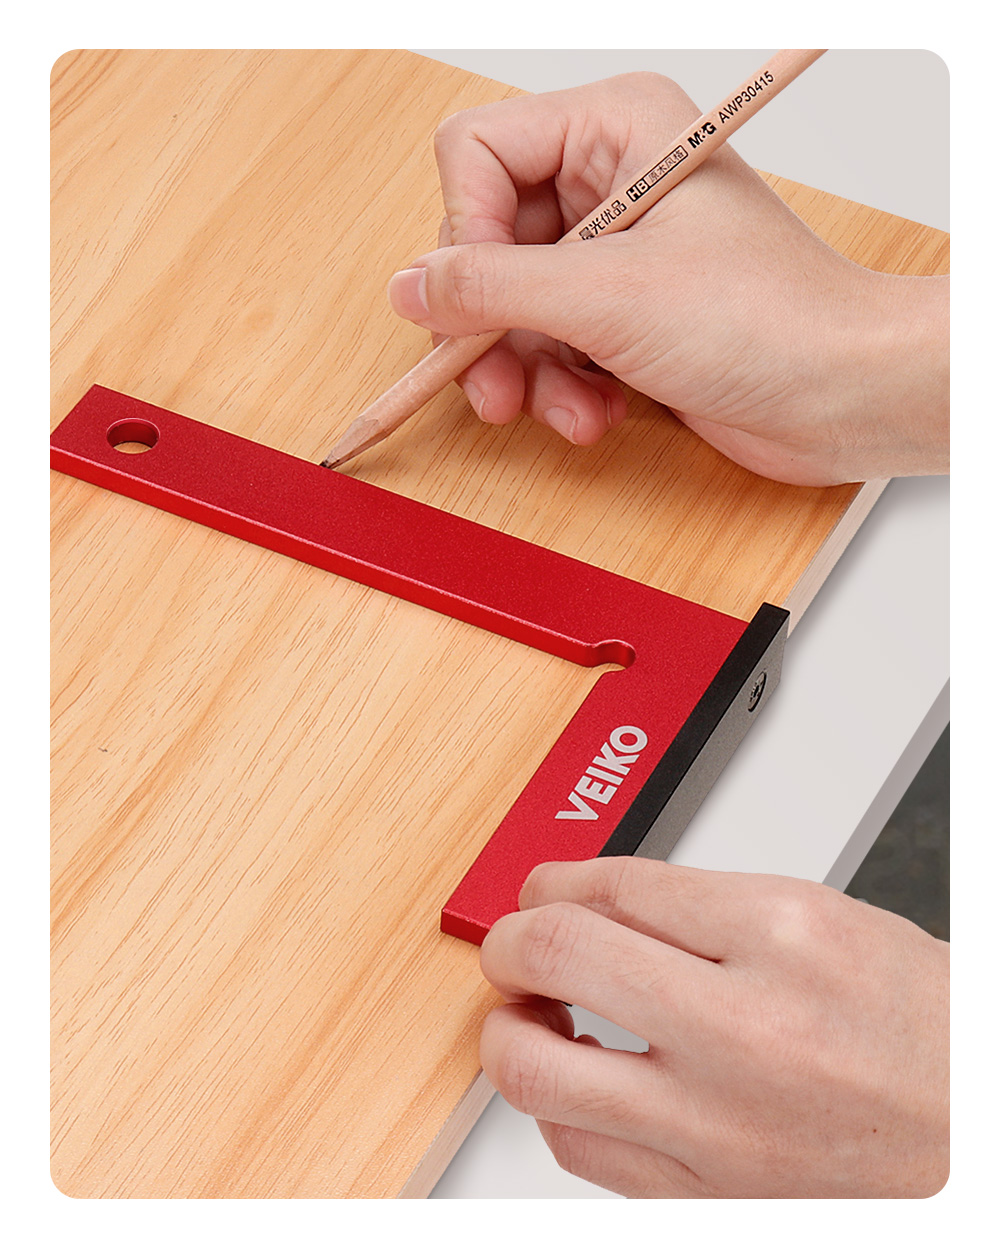 VEIKO-Aluminum-Alloy-150X100MM-90-Degree-Right-Angle-Ruler-With-Solid-Wide-Base-Check-Tool-Verticali-1914183-6